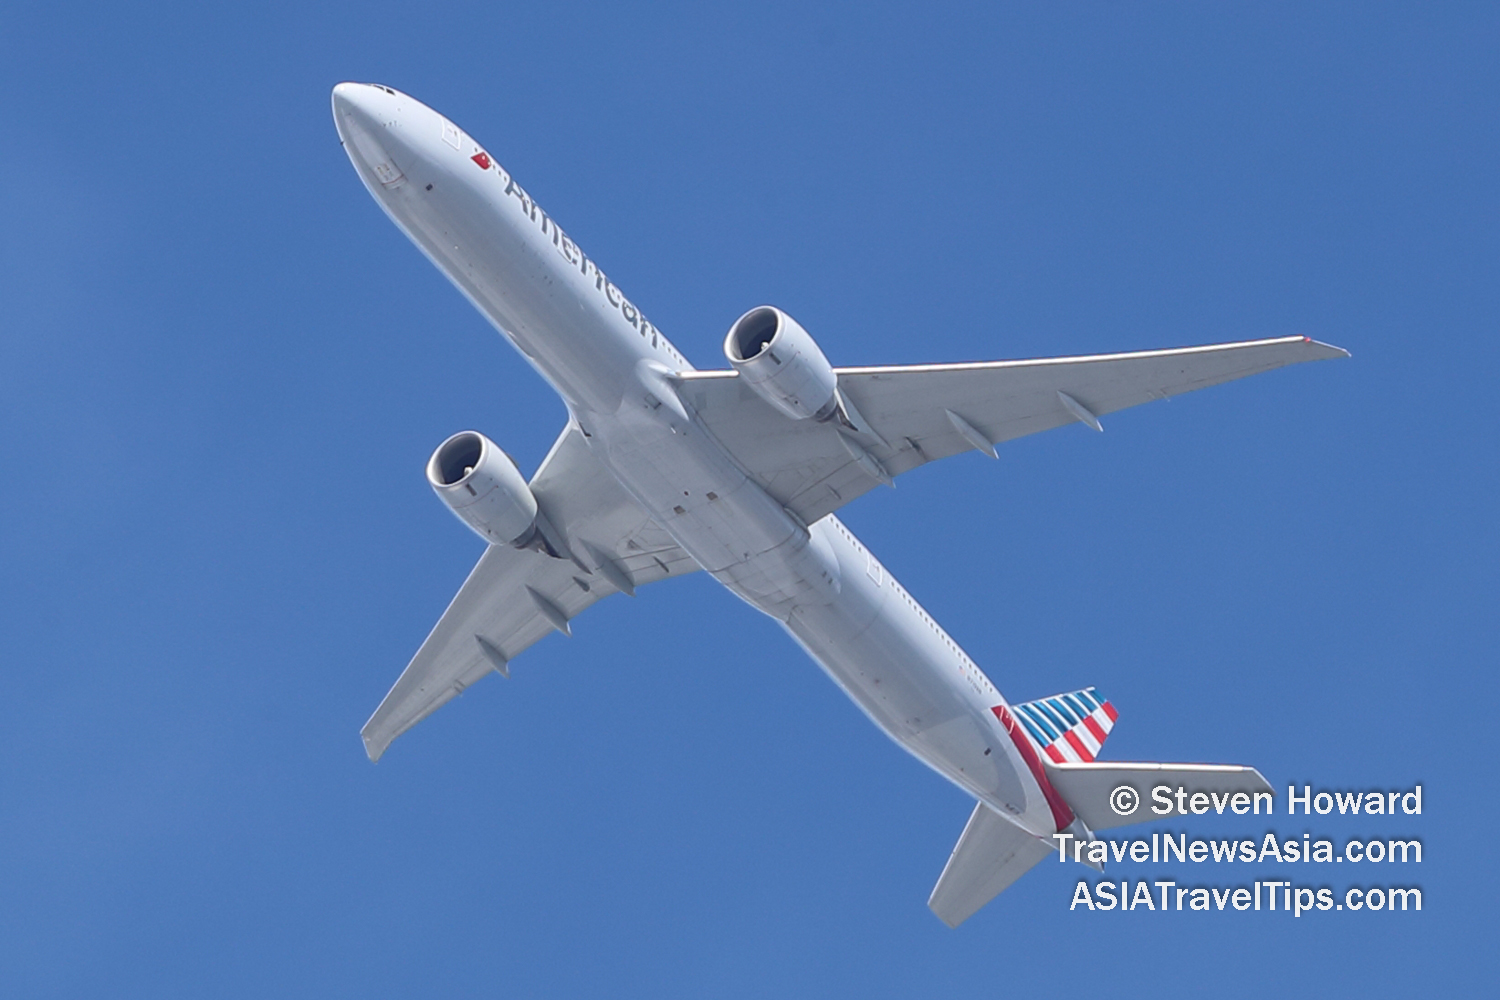 American Airlines Boeing 777 reg: N719AN. Picture by Steven Howard of TravelNewsAsia.com Click to enlarge.